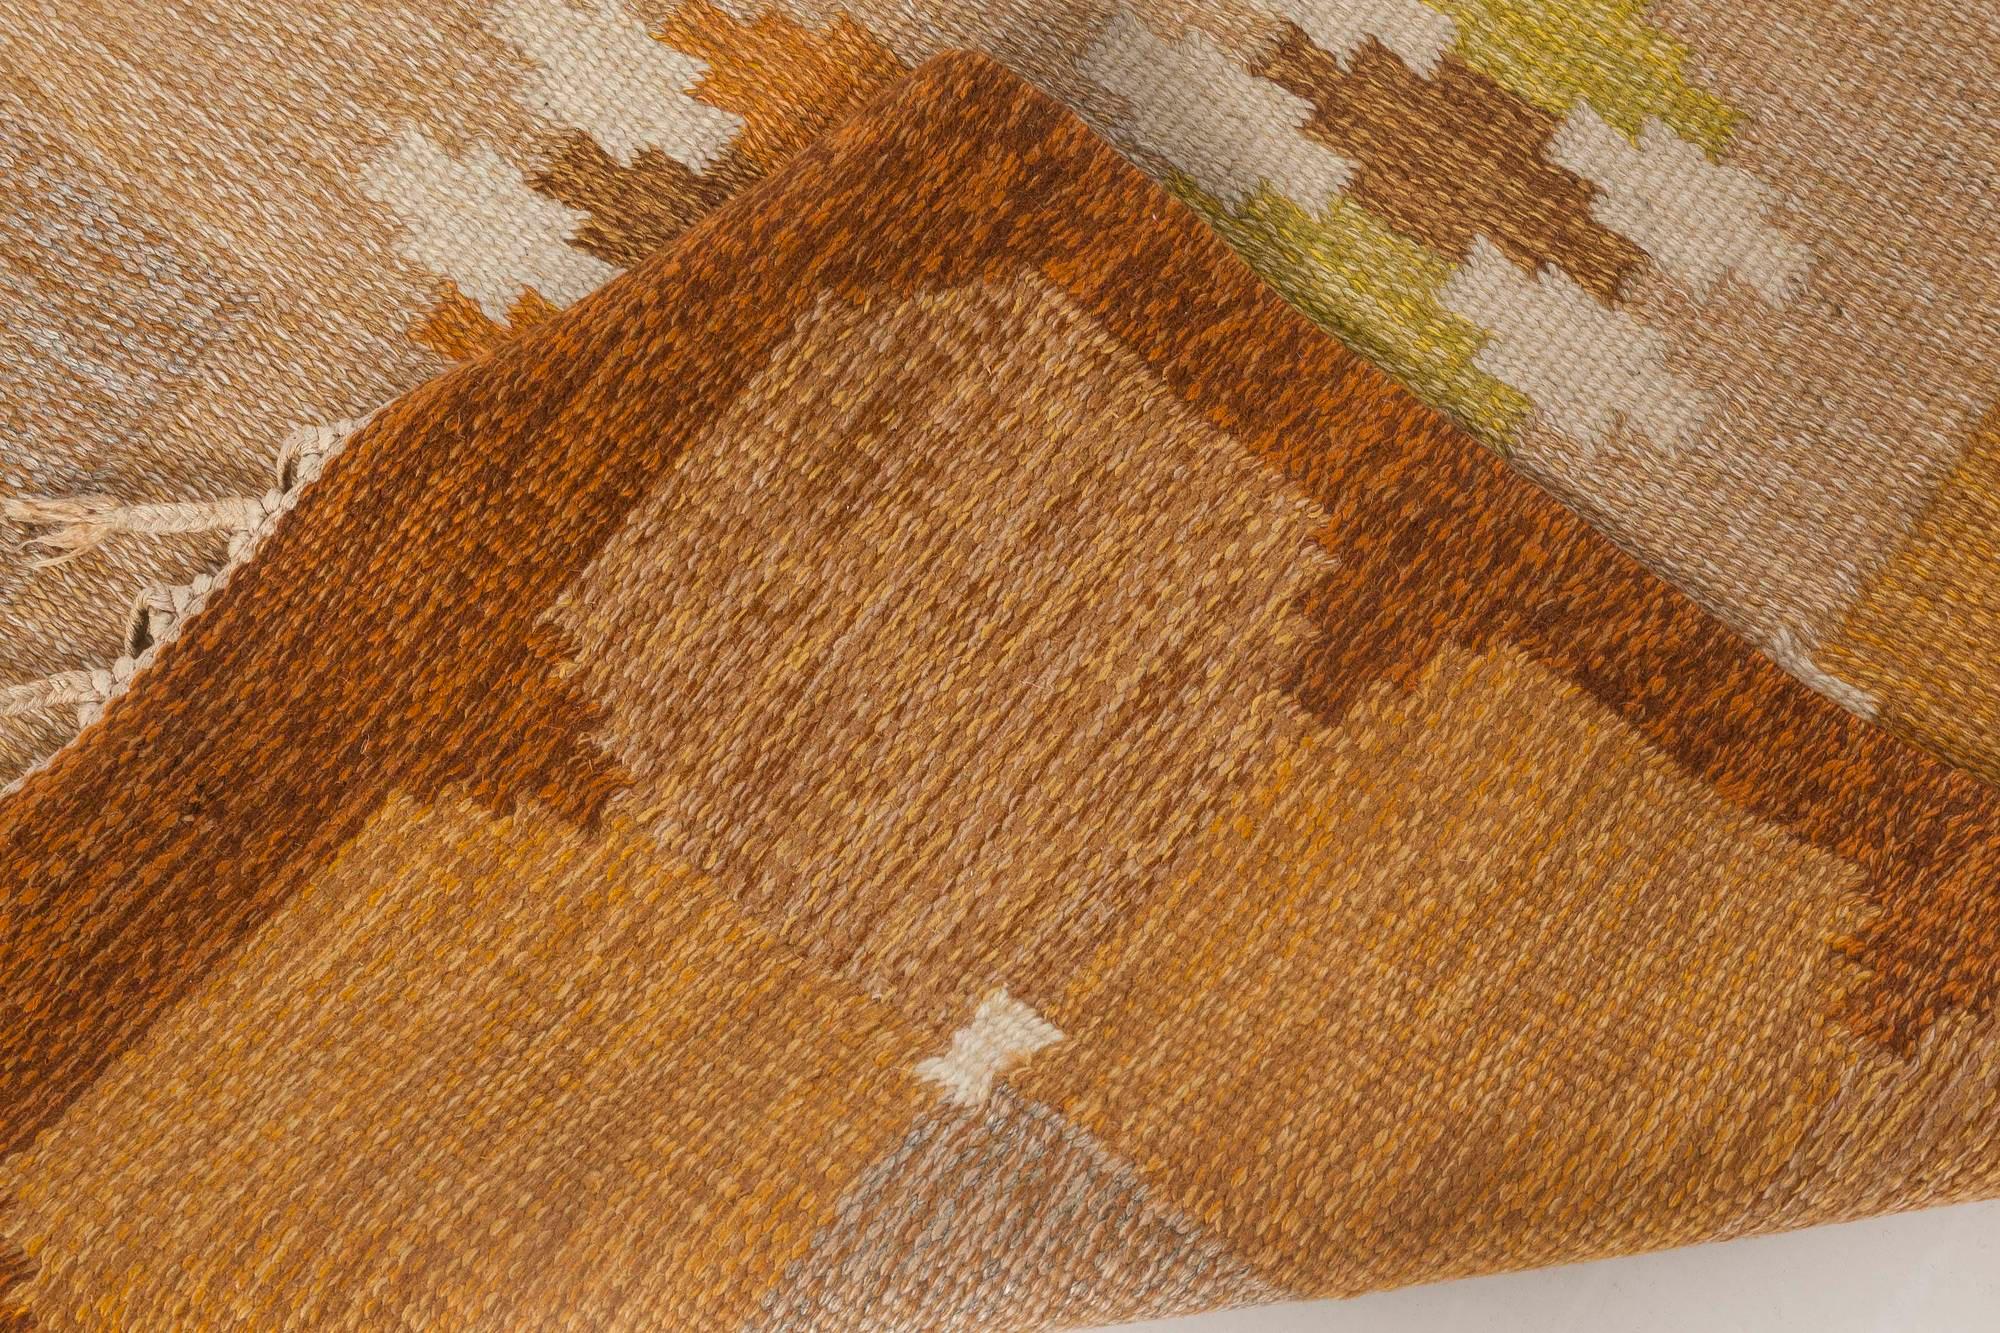 Mid-20th Century Swedish Flat-Weave Wool Rug by Ingegerd Silow In Good Condition For Sale In New York, NY